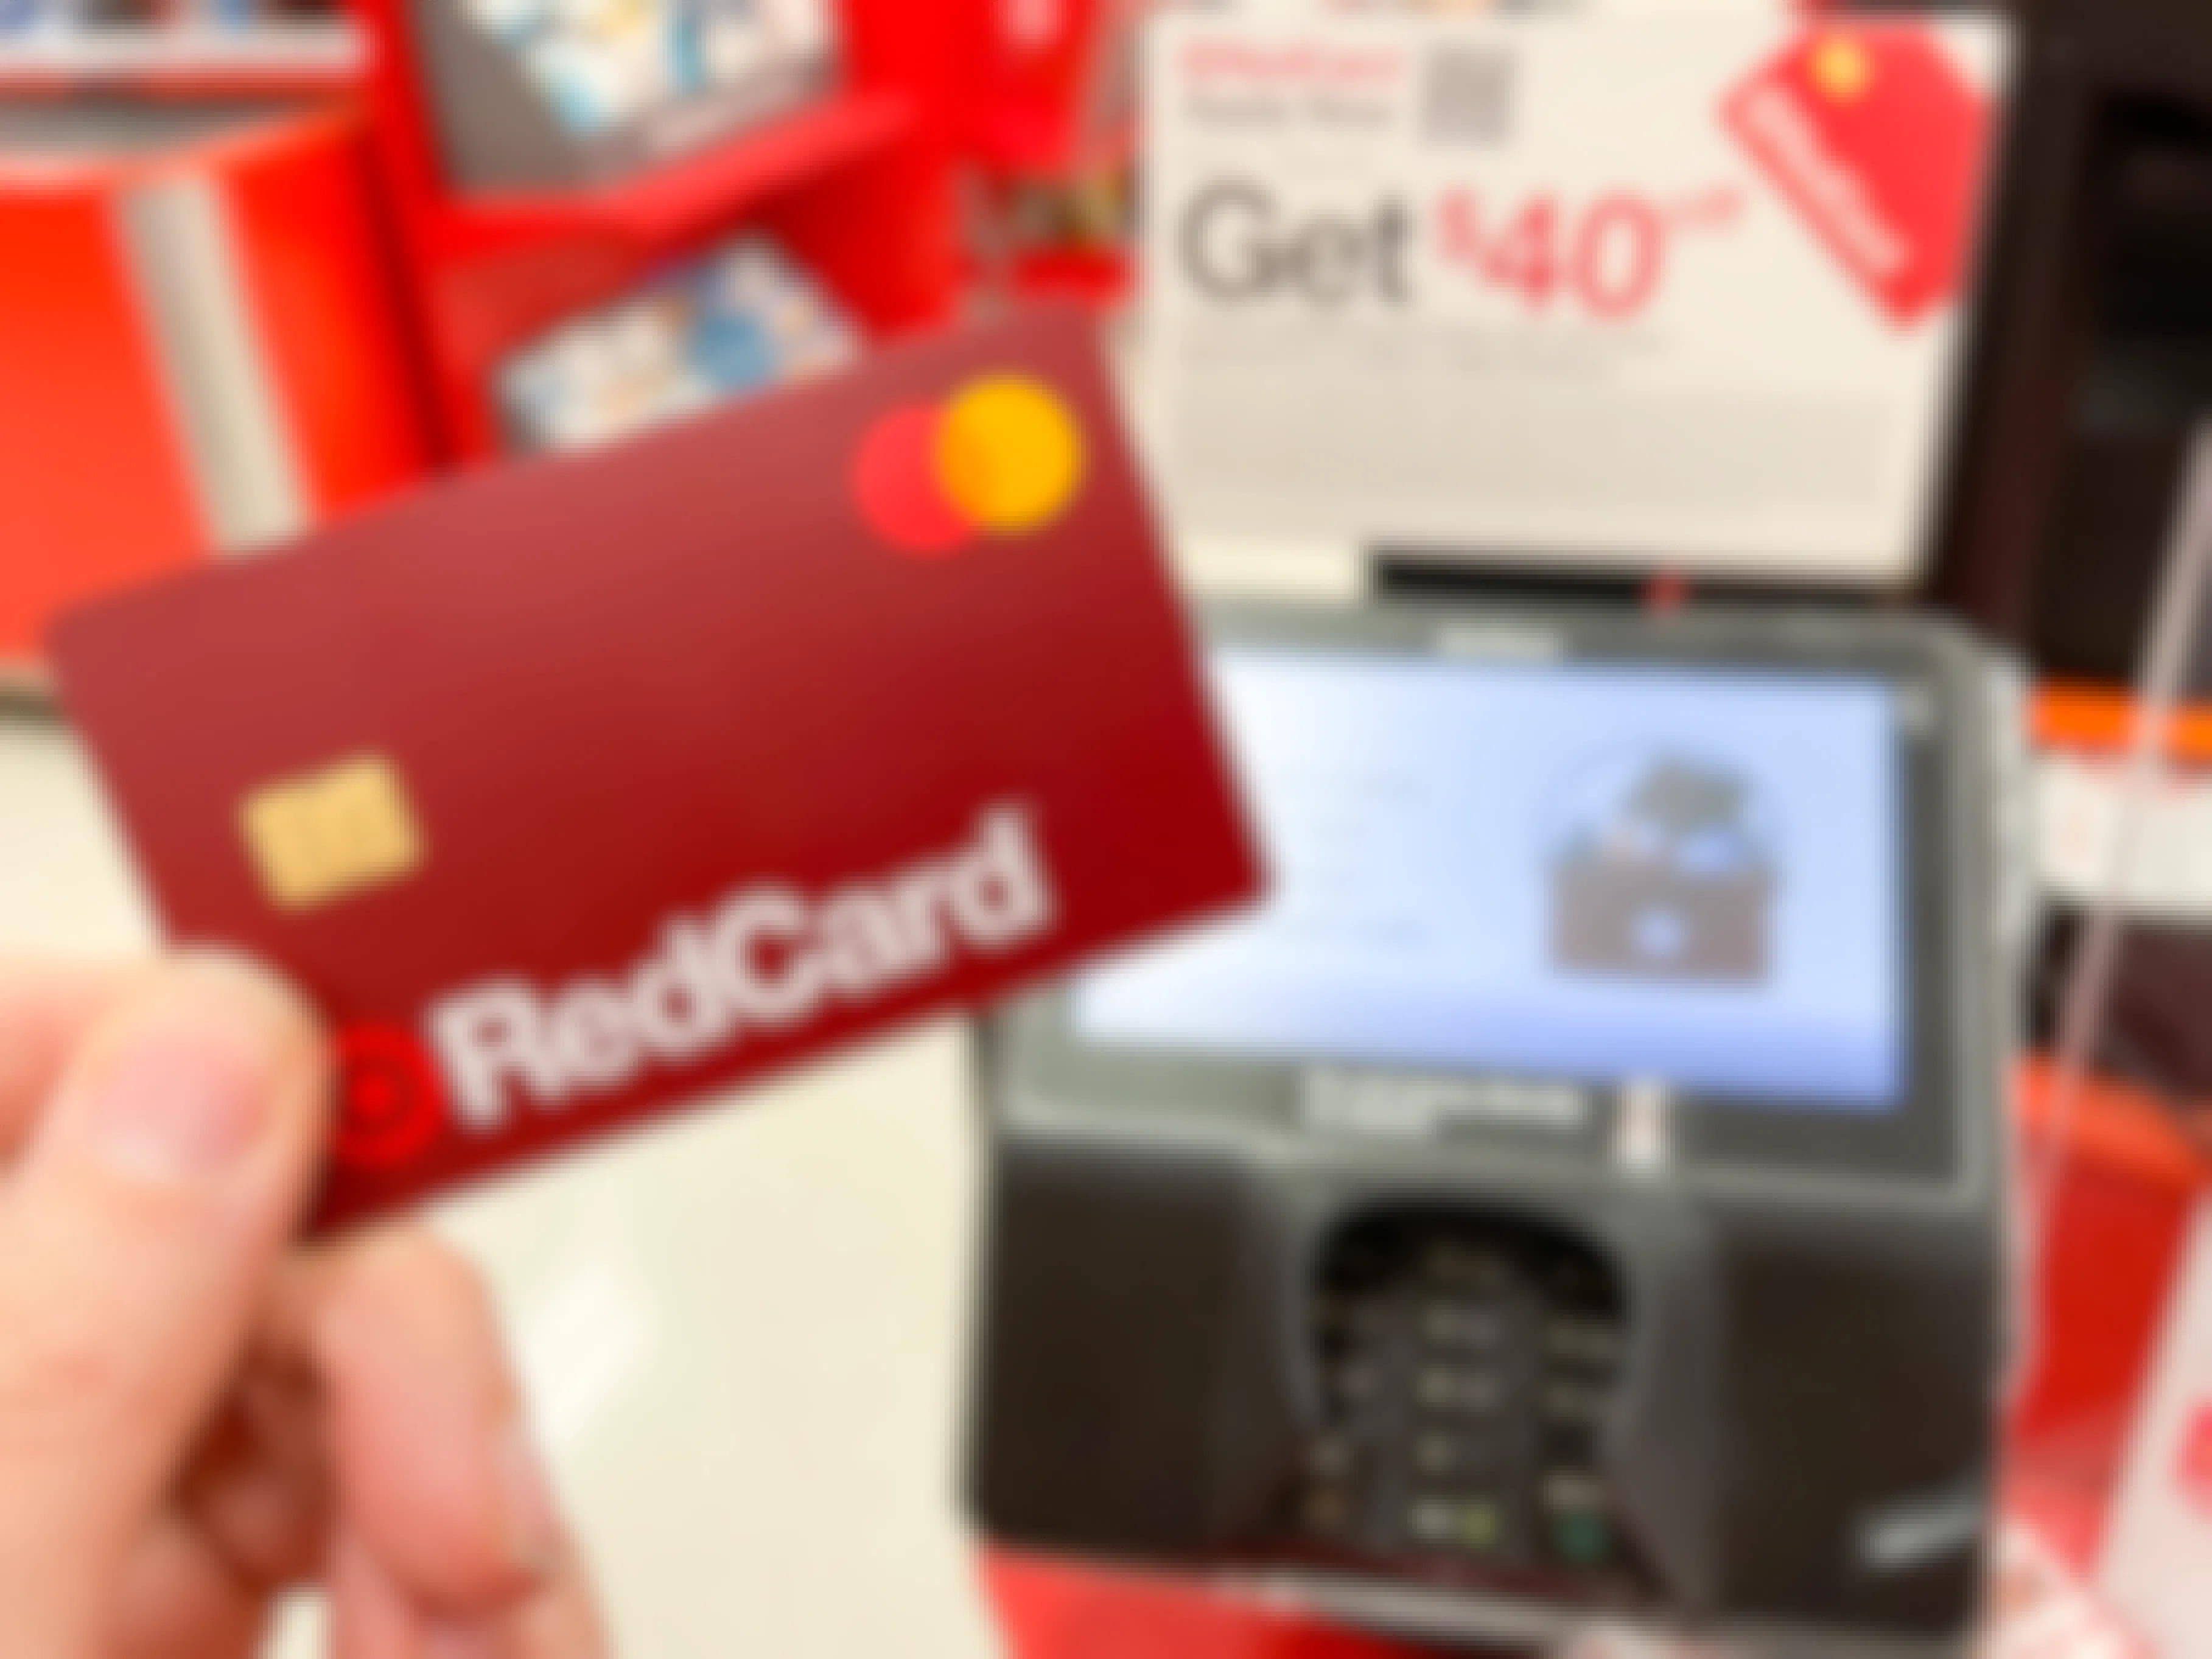 A Target RedCard being held next to a credit card reader at Target checkout.